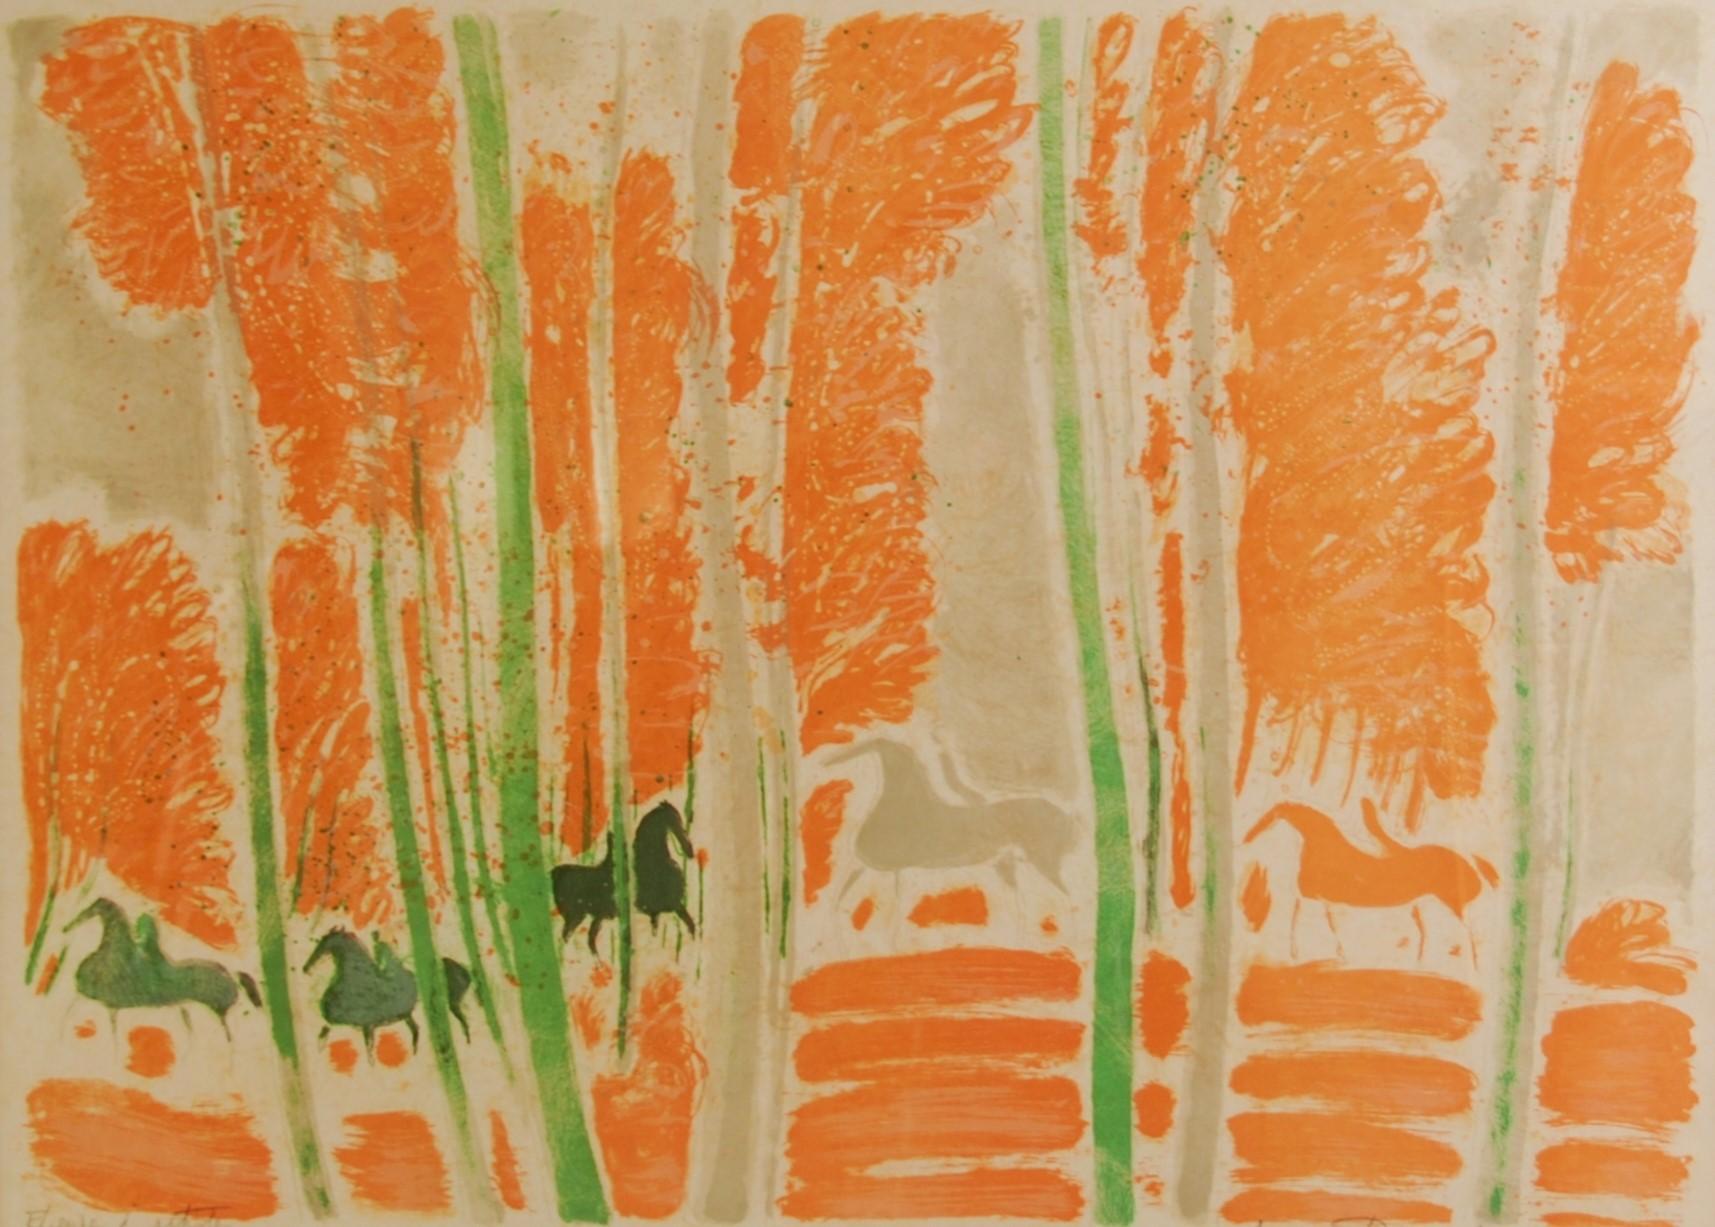 ANDRÉ BRASILIER (1908-1992)
AUTOMNE FINLANDAIS, 1977
Lithograph on wove paper 
Annotated 